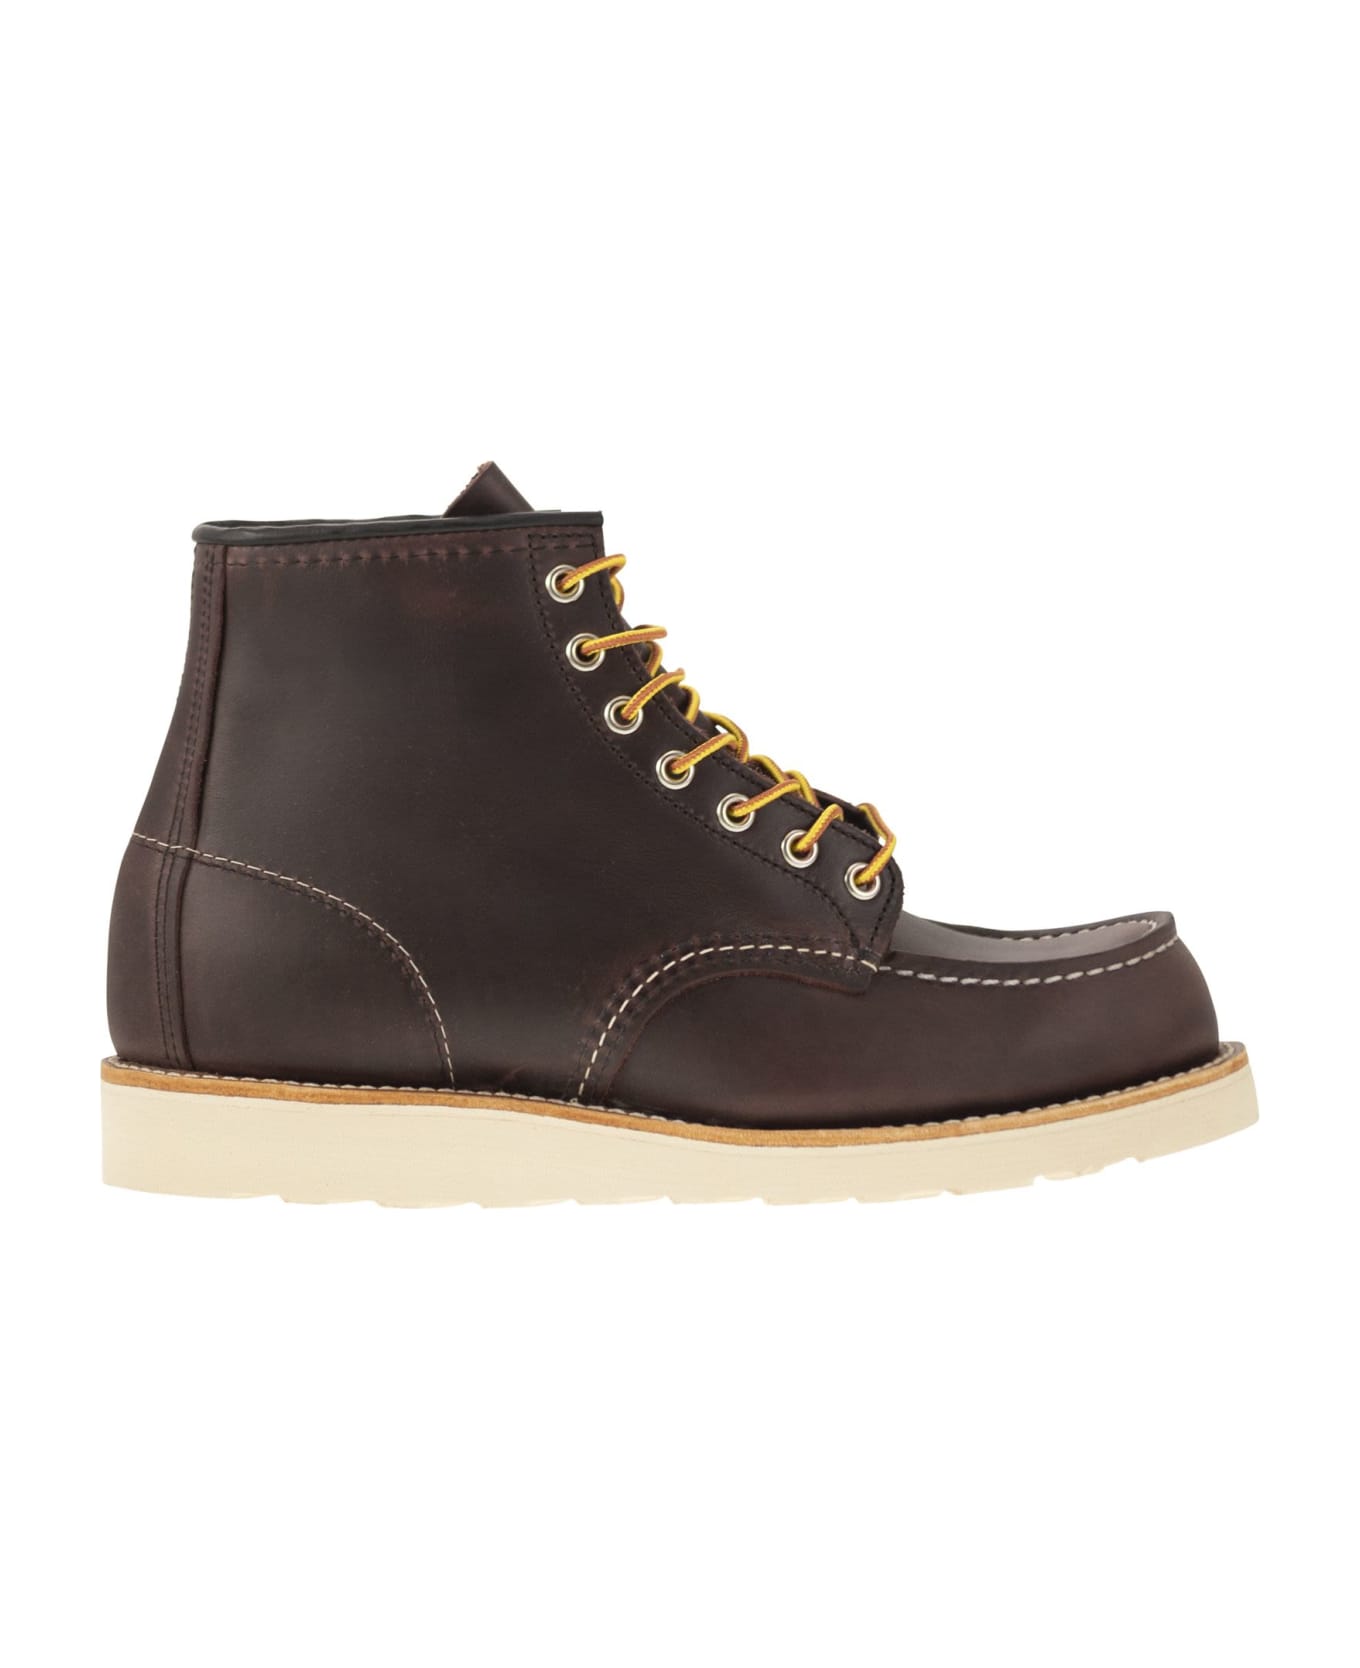 Red Wing Classic Moc - Leather Boot With Laces - Burgundy ブーツ